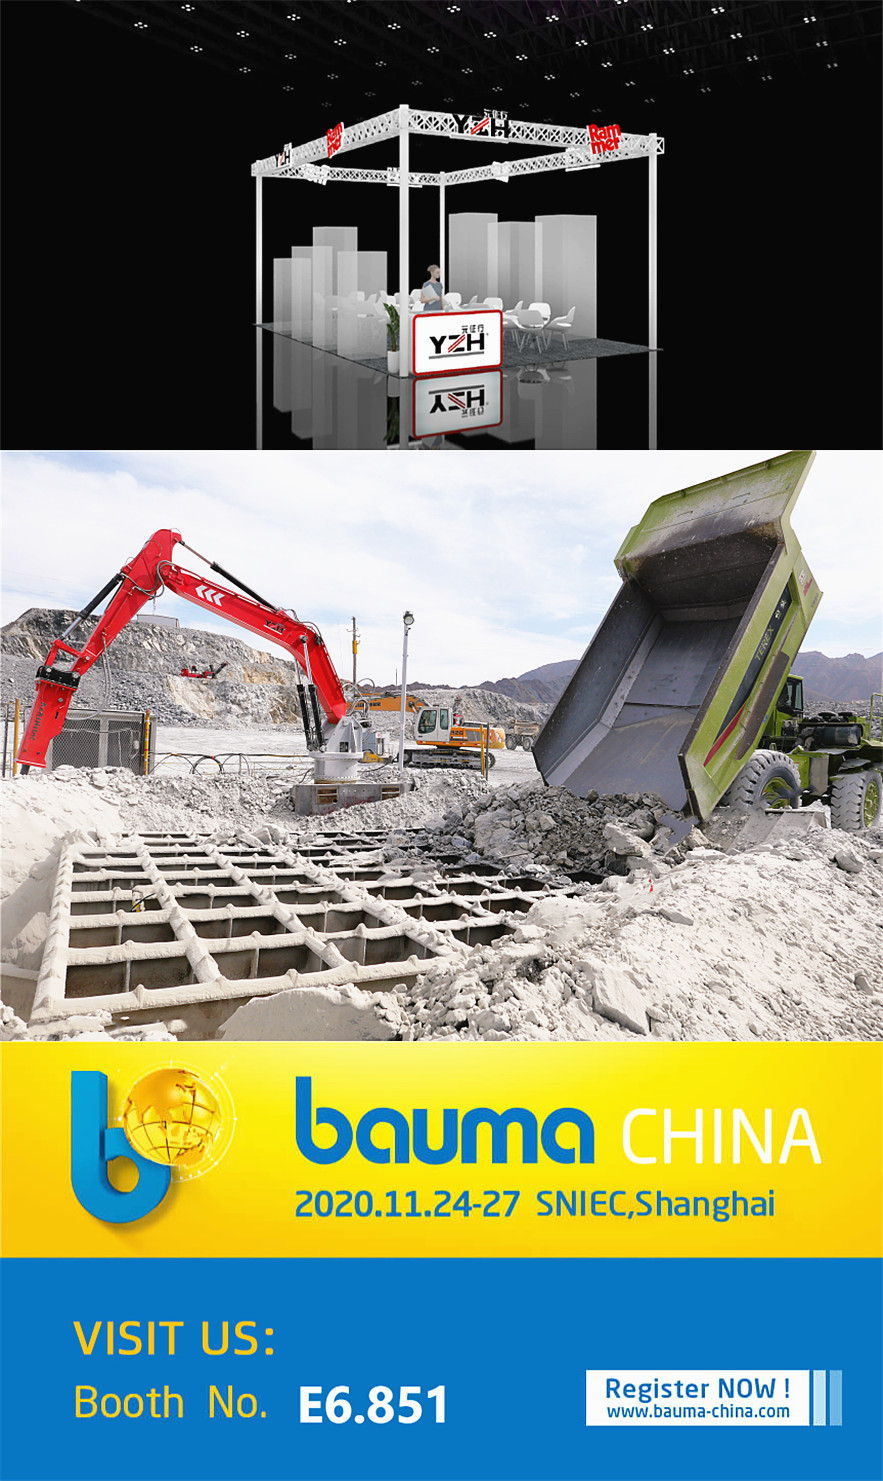 inan YZH and Finland RAMMER Will Jointly Participate In bauma CHINA 2020-2